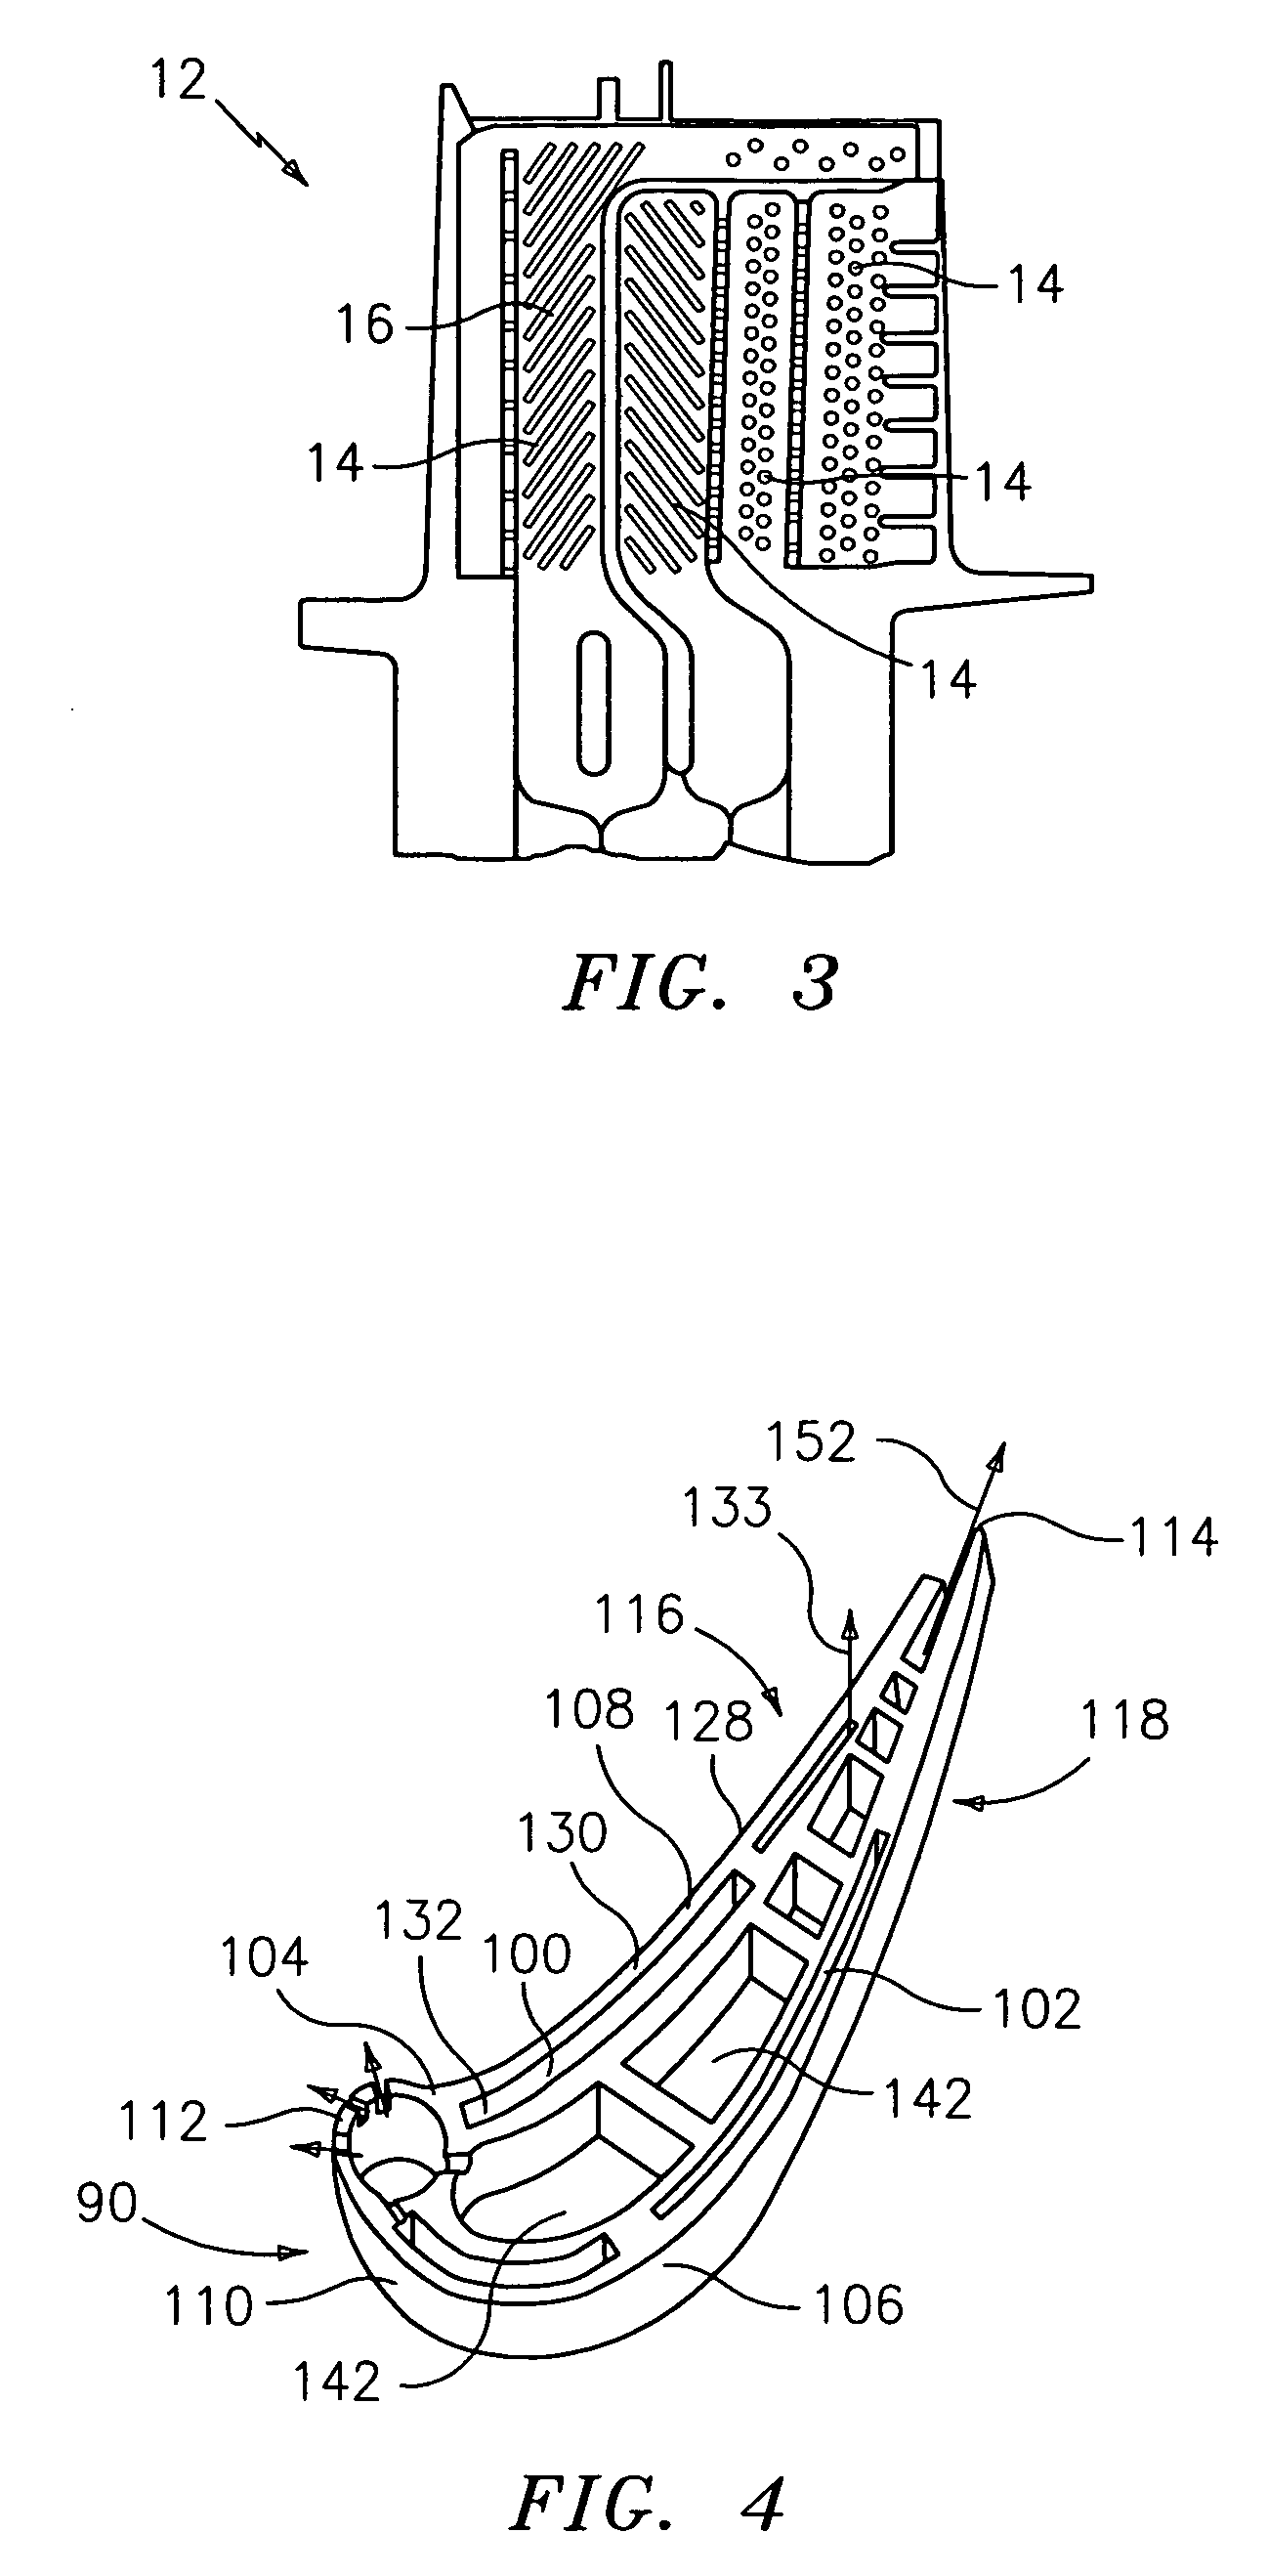 Integrated platform, tip, and main body microcircuits for turbine blades